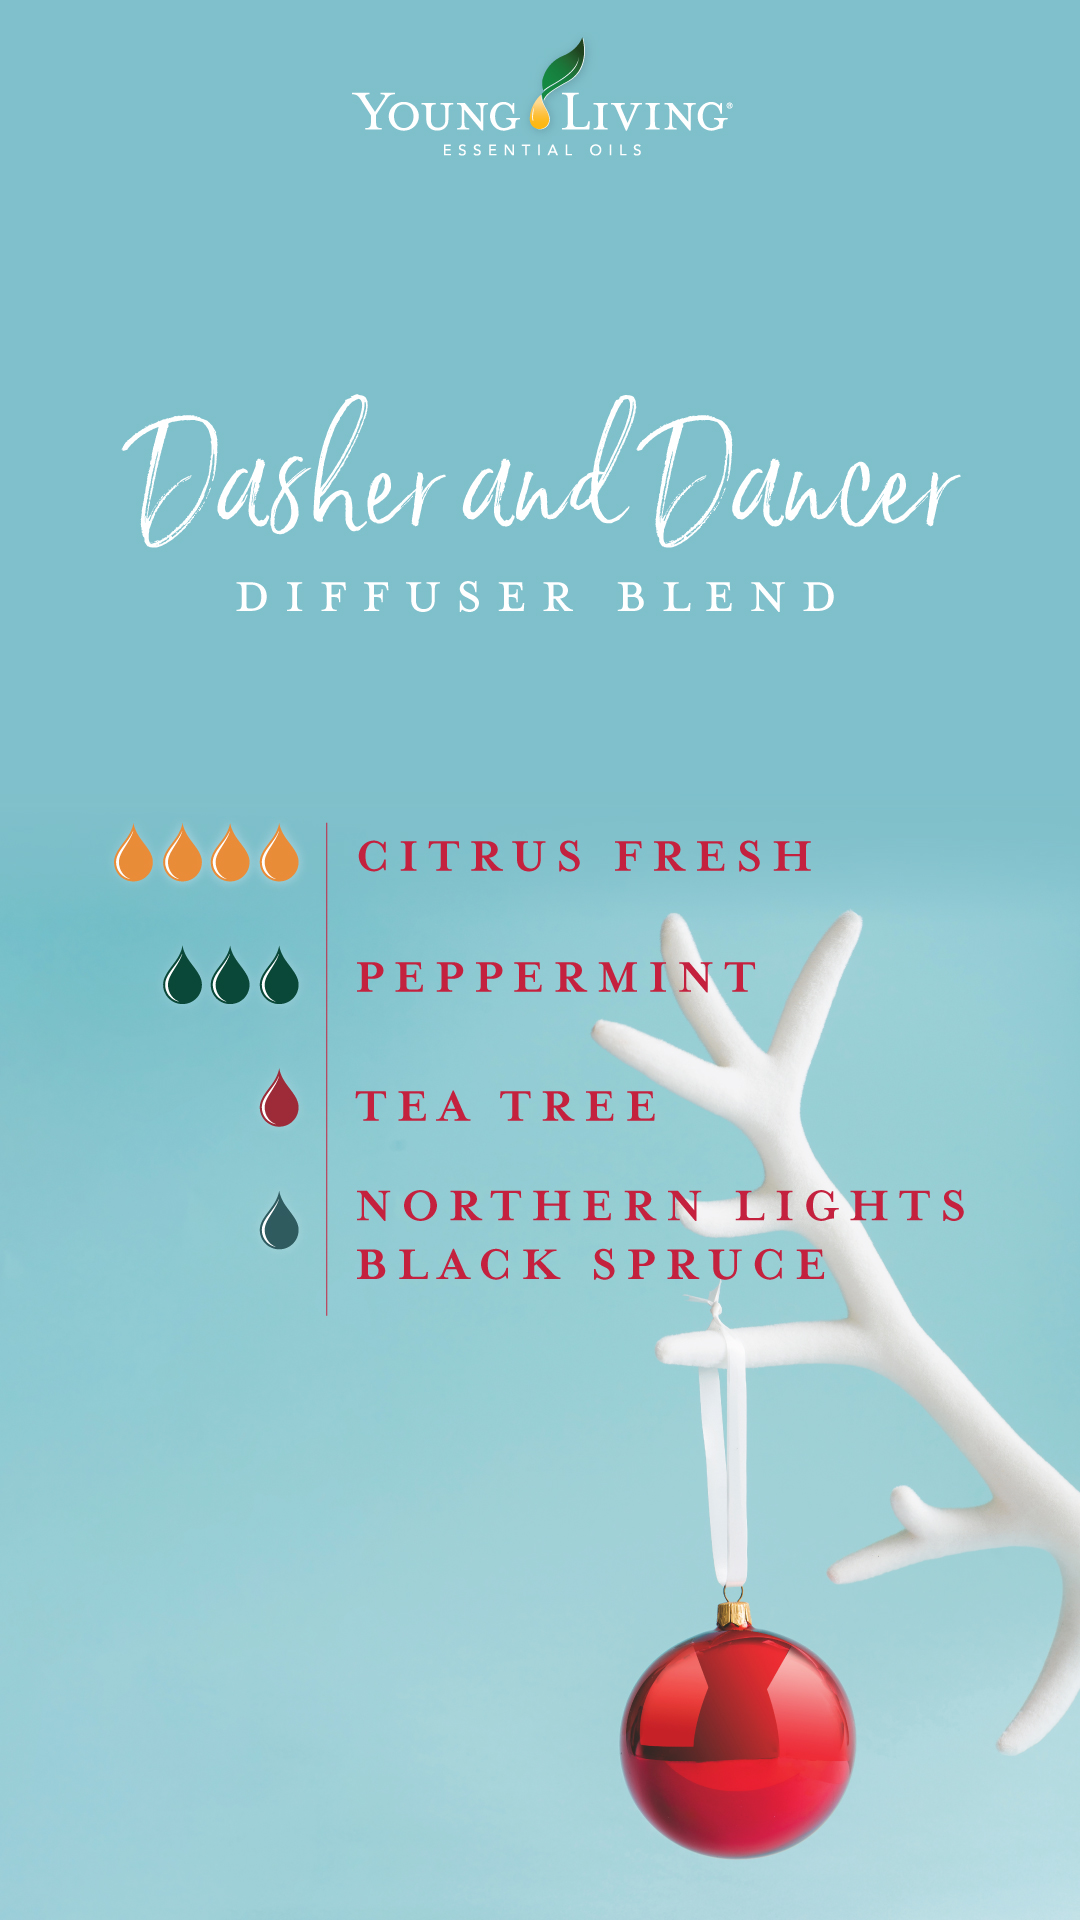 Dasher and Dancer Diffuser Blend